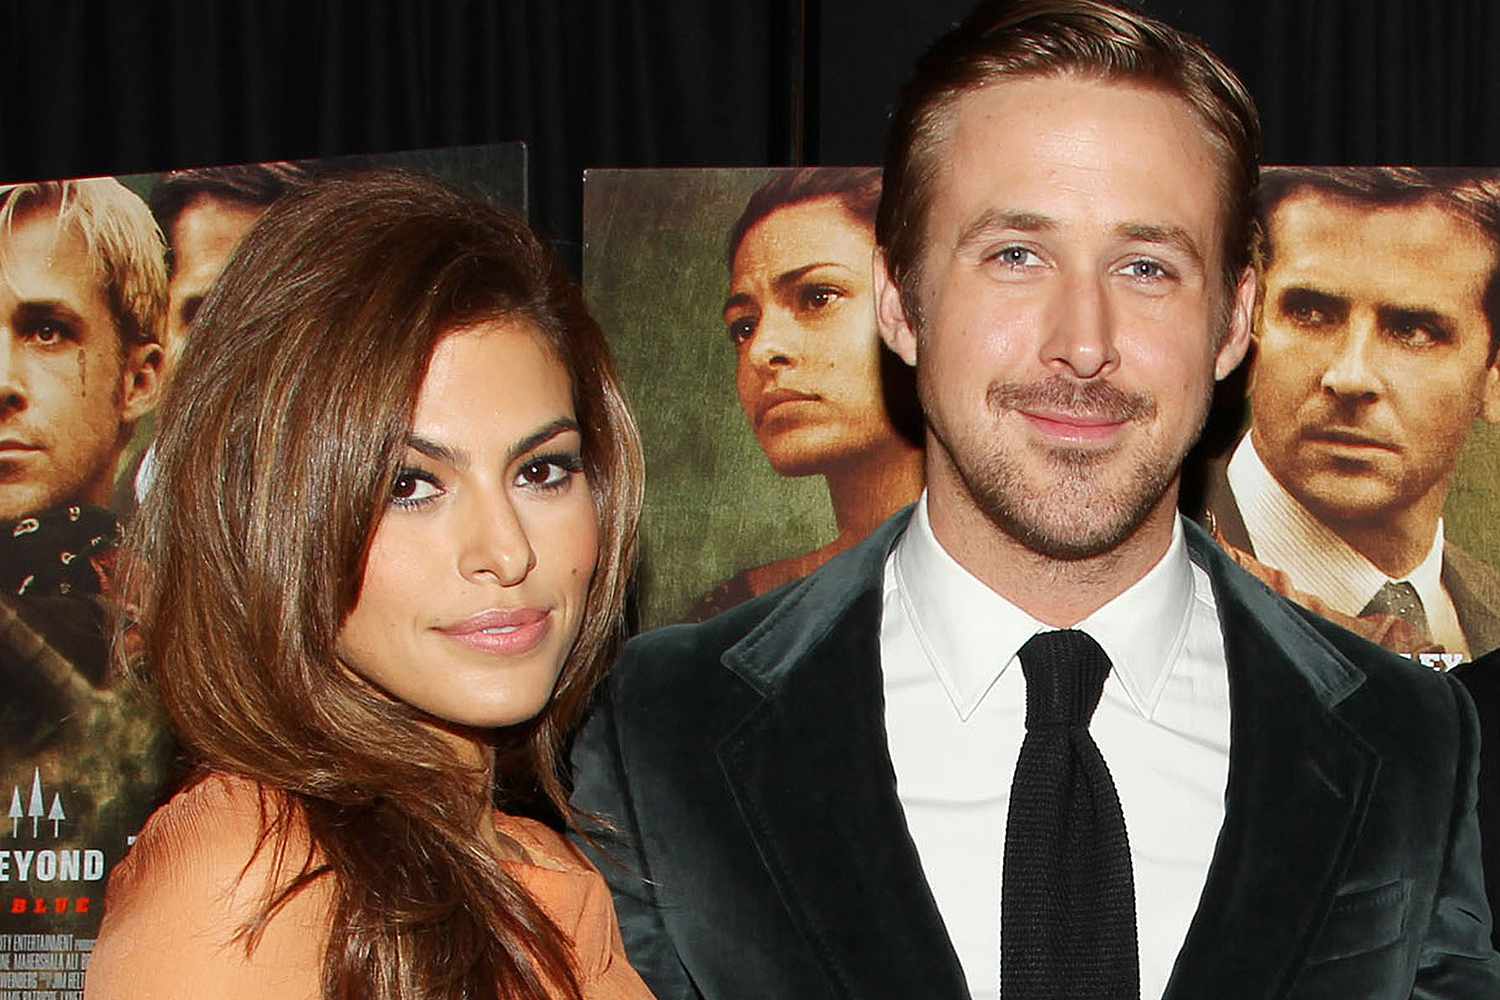 Ryan Gosling Says He 'Couldn't Be Here Without' Eva Mendes: 'It's Endless How She Helps Me'